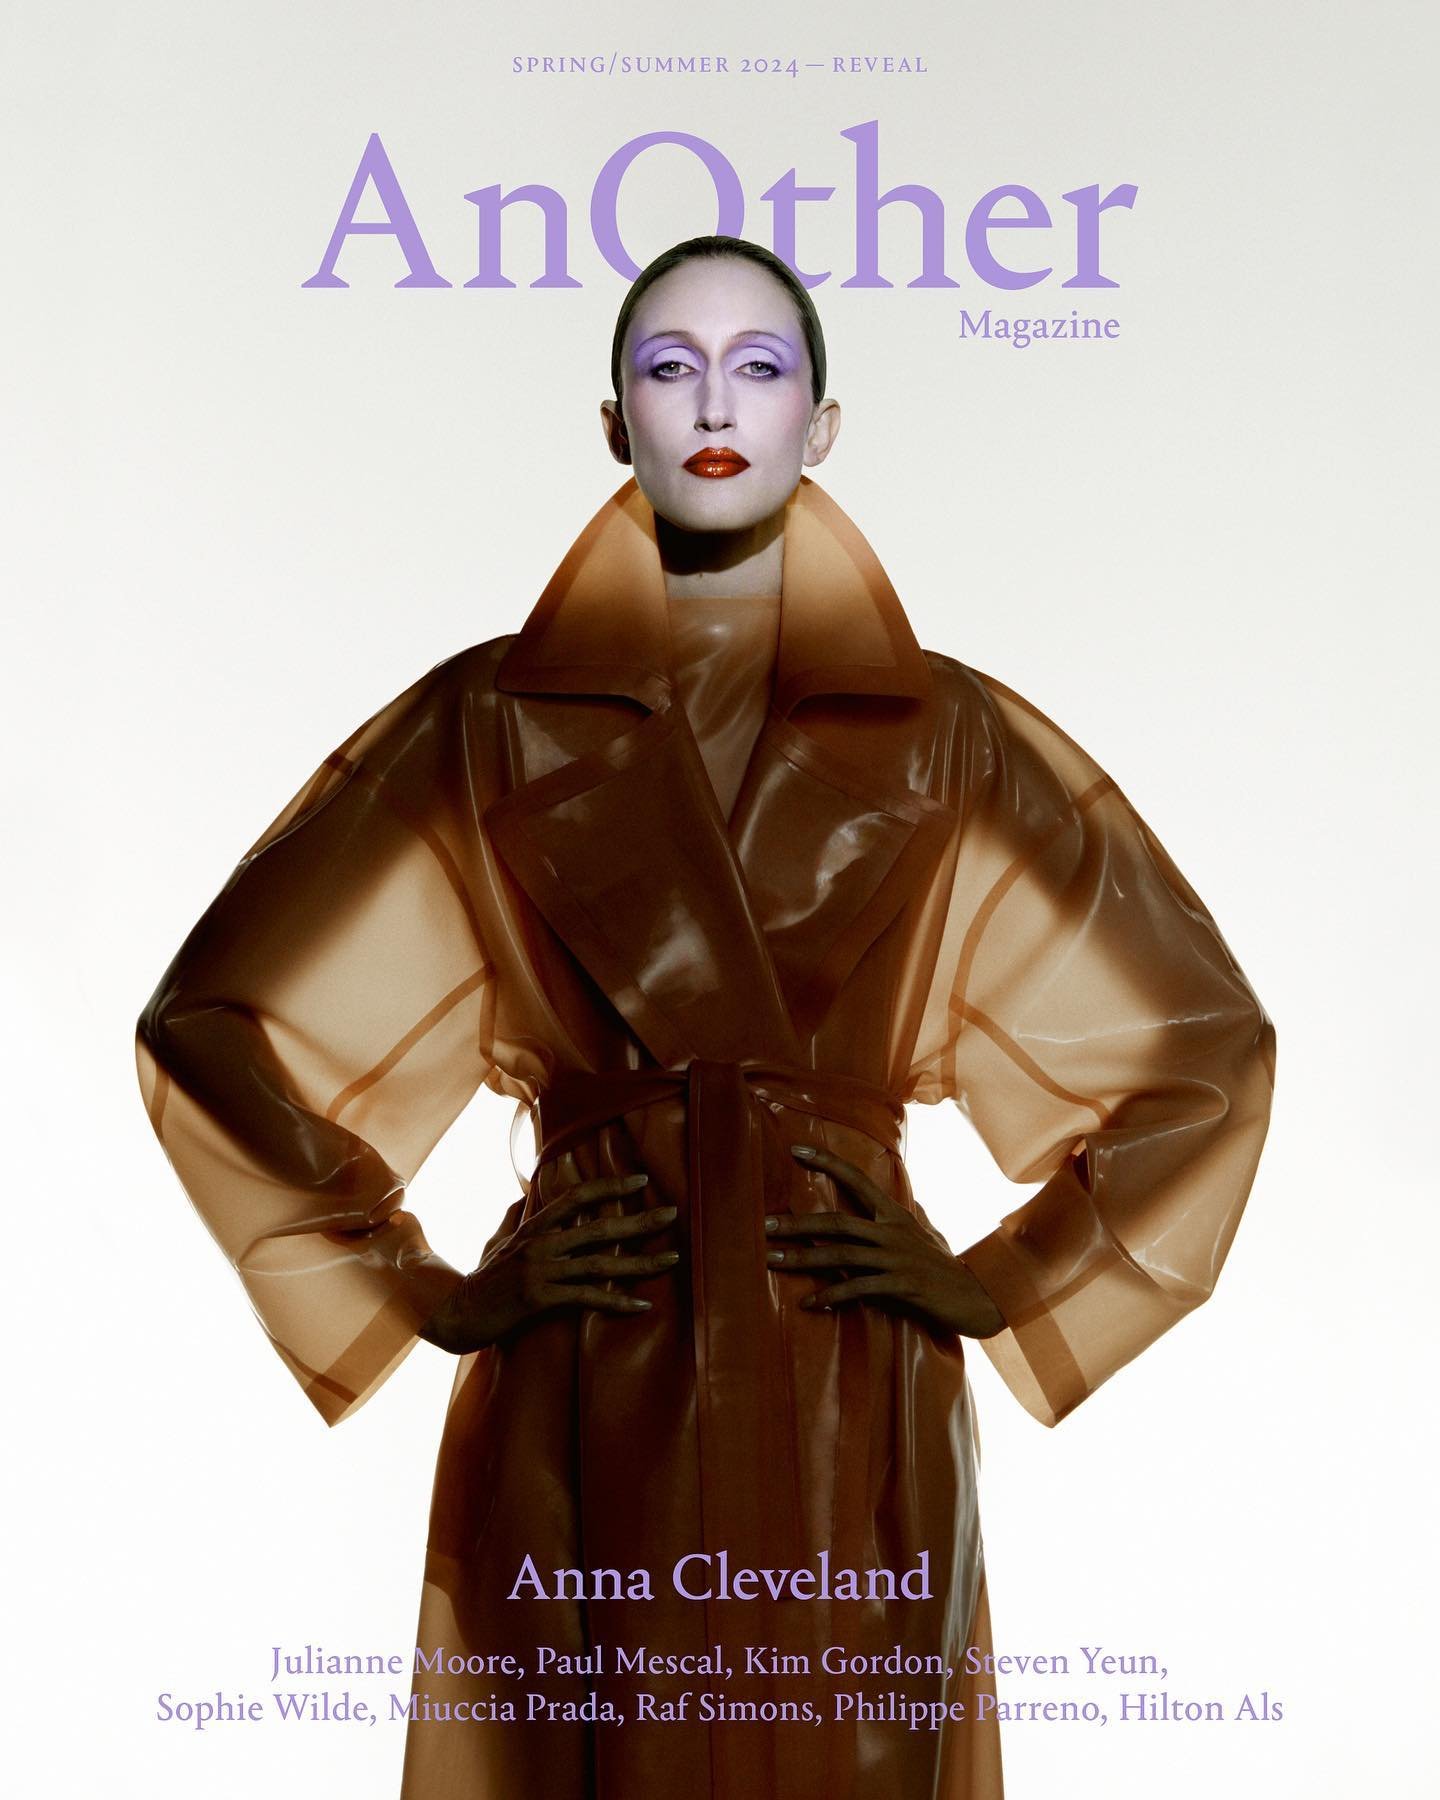 Anna-Cleveland-by-Carlijn-Jacobs-AnOther-Magazine-SS-2024-Cover.jpg